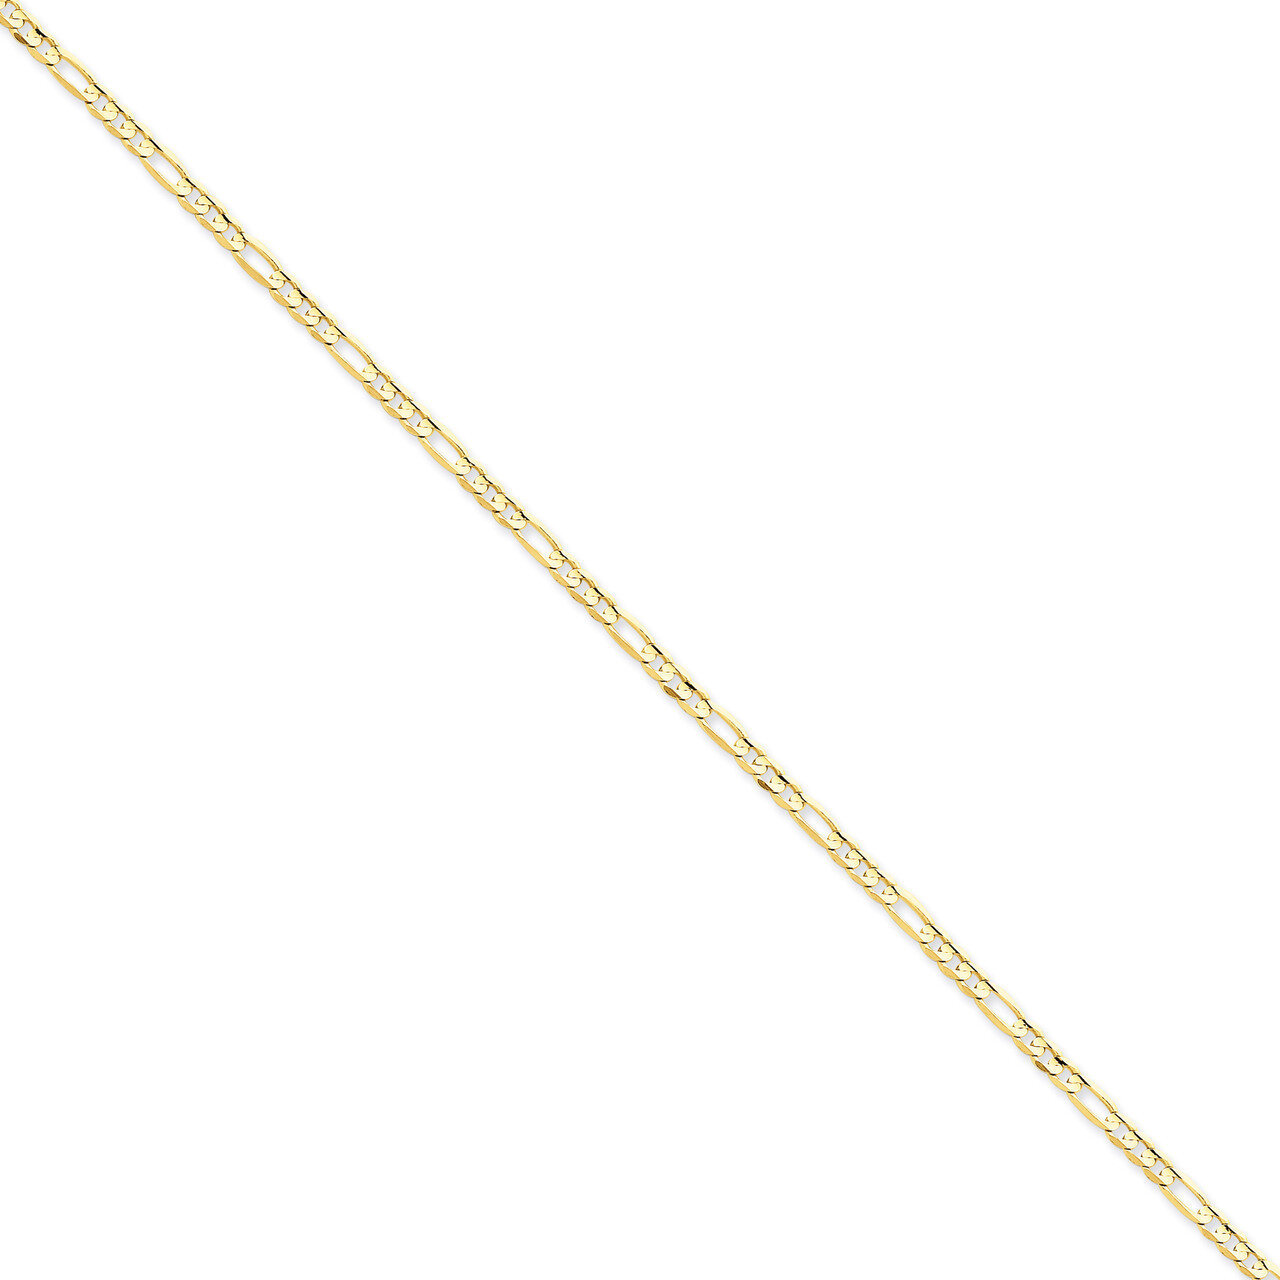 3mm Concave Open Figaro Chain 18 Inch 14k Gold LFG080-18